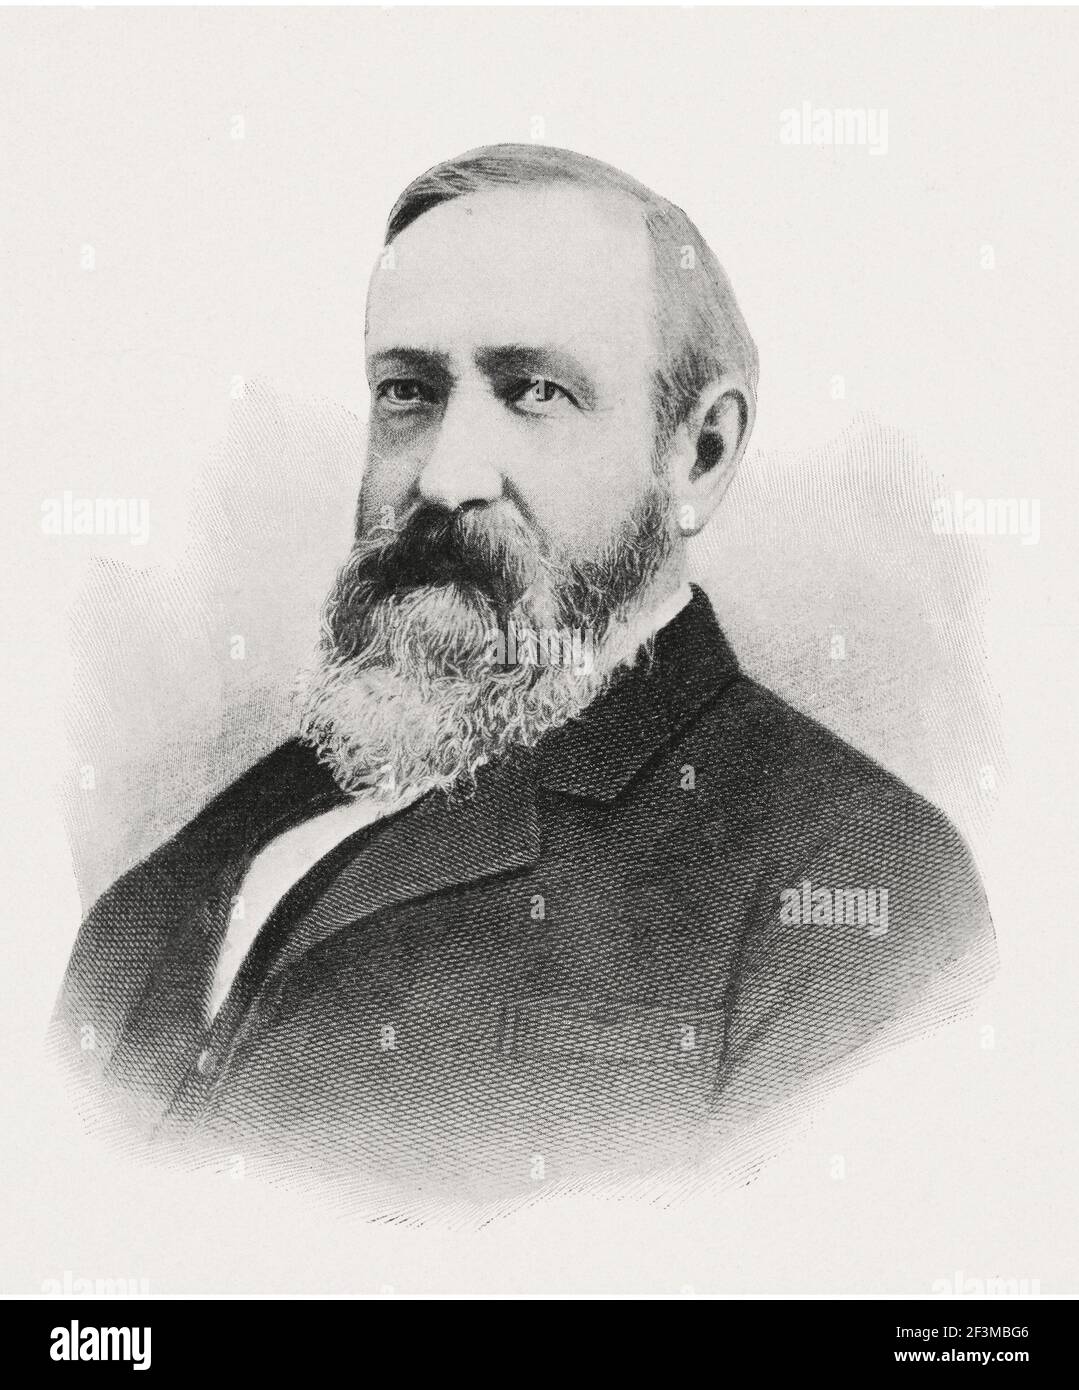 Portrait of president Benjamin Harrison. Benjamin Harrison (1833 – 1901) was an American politician and lawyer who served as the 23rd president of the Stock Photo